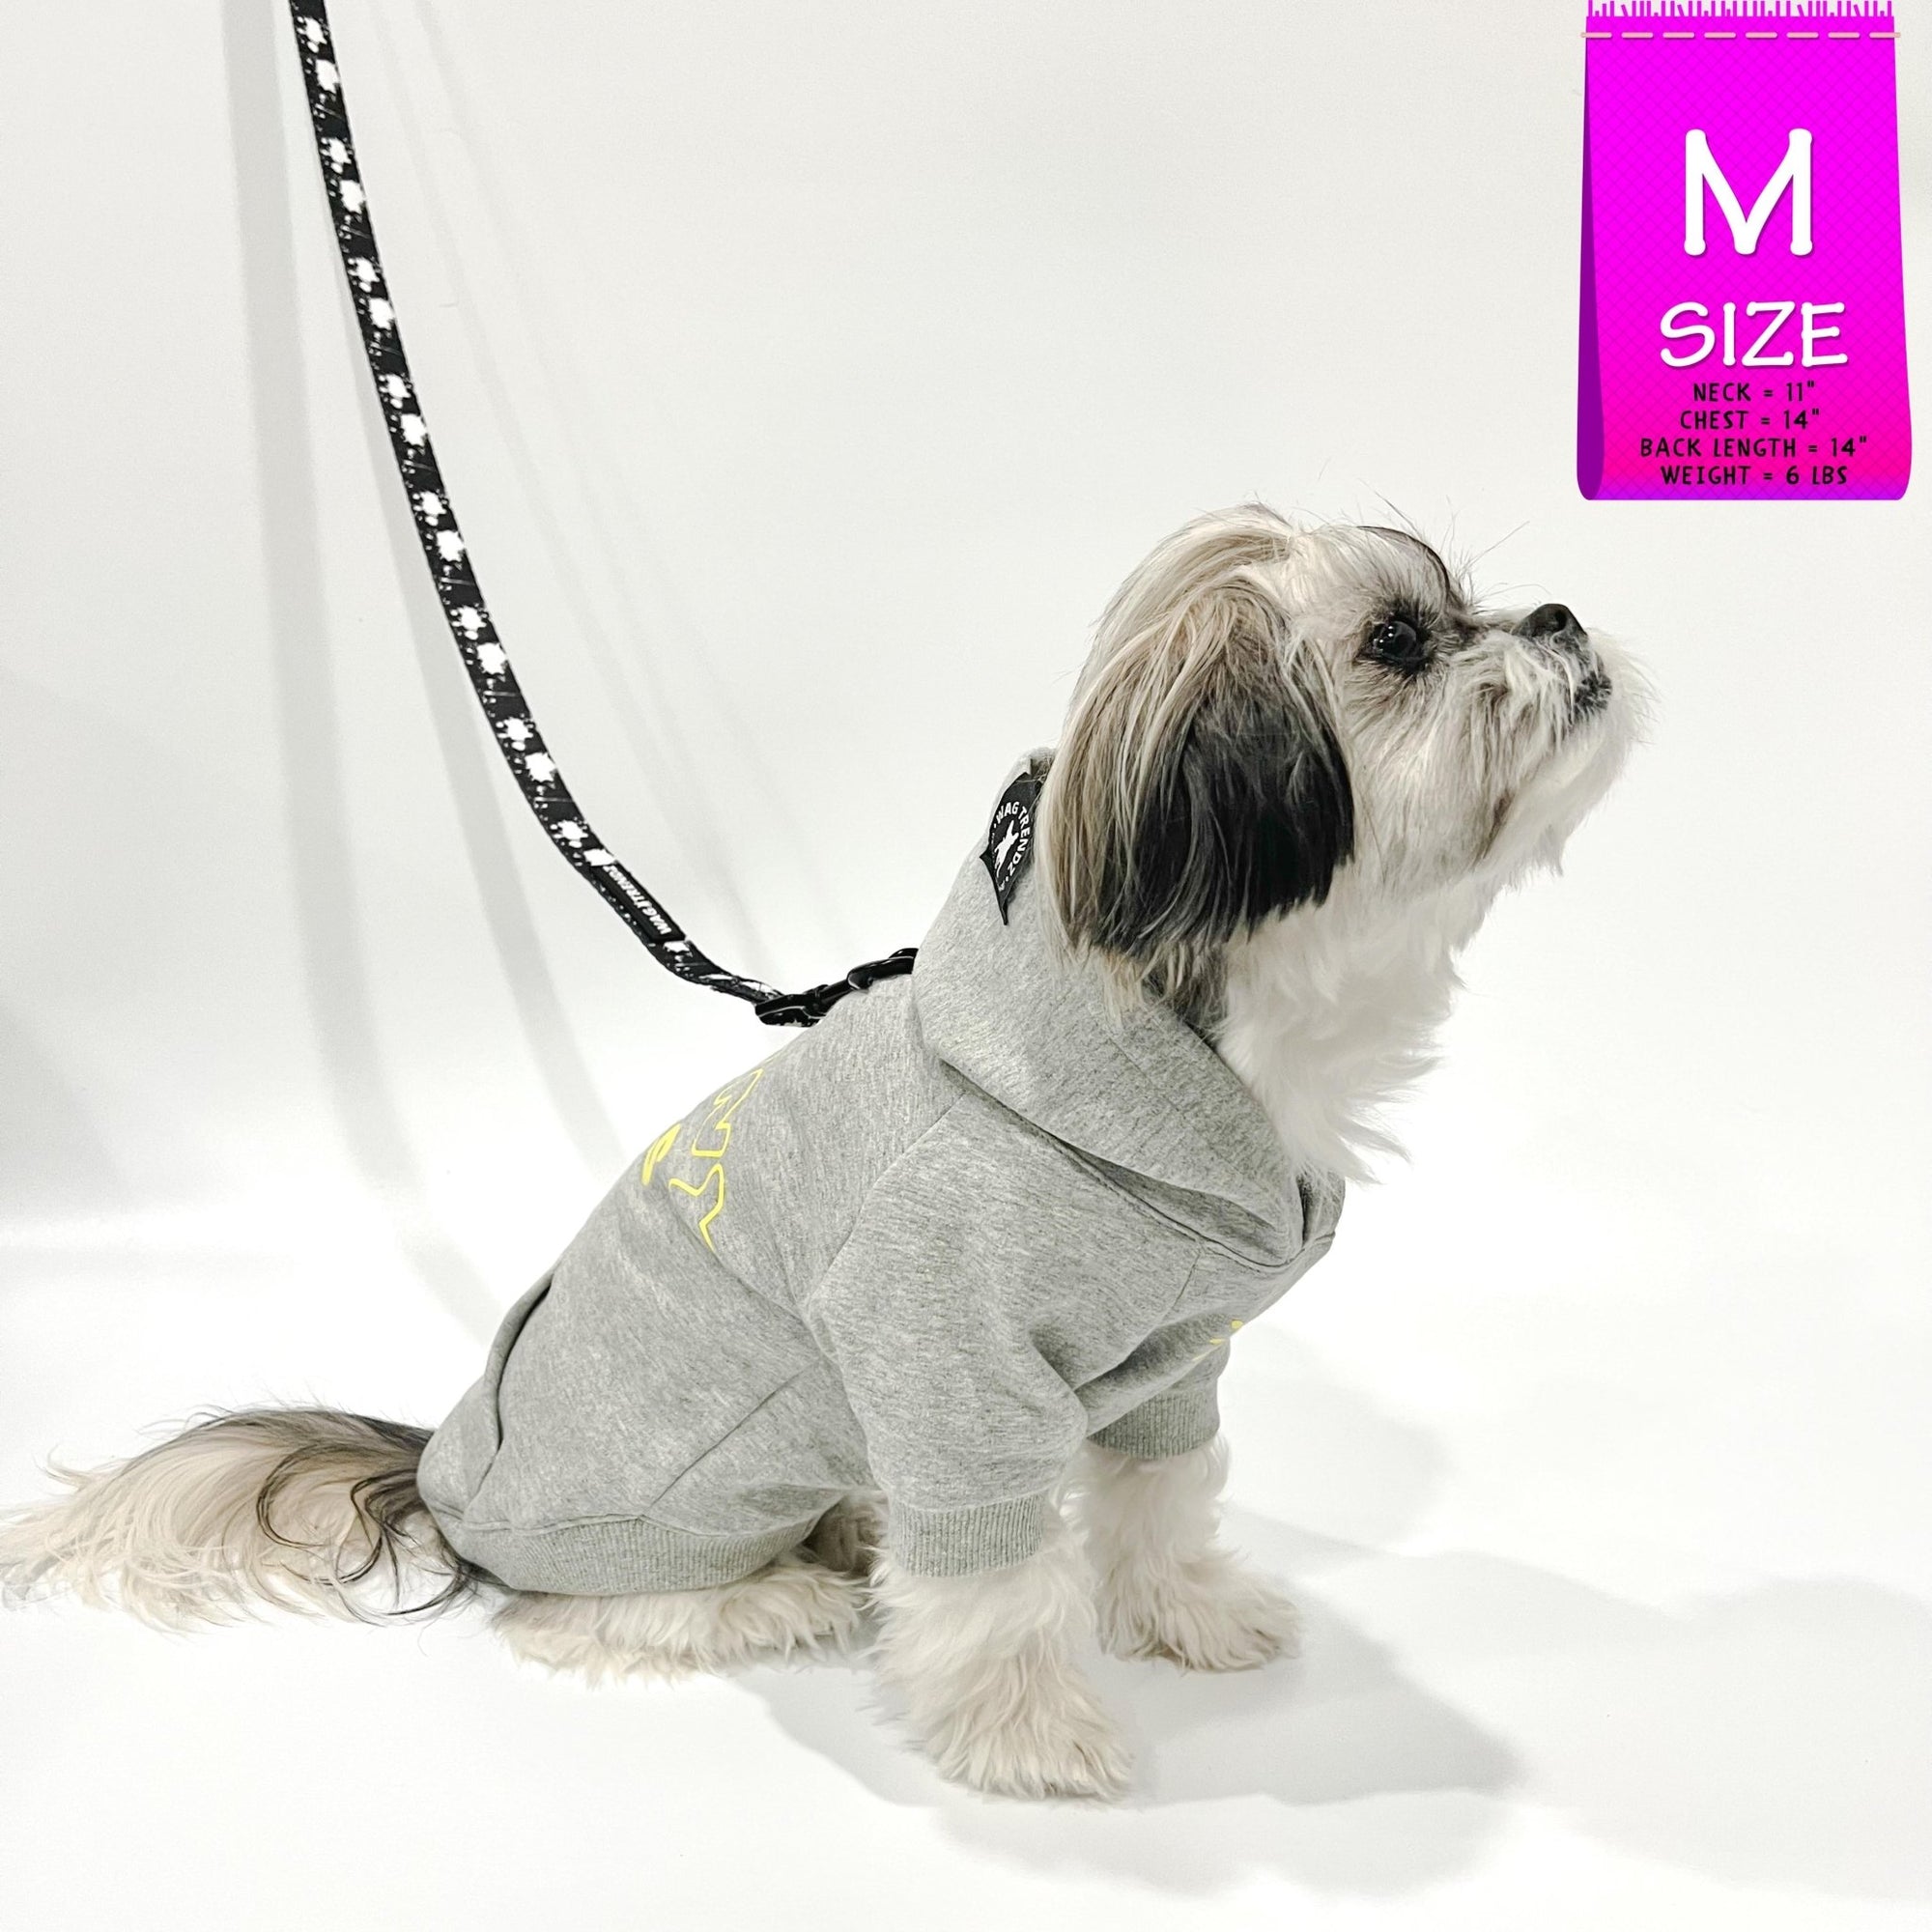 Dog hoodie - Hoodies For Dogs - Shih Tzu mix wearing &quot;Sunny Days&quot; dog hoodie in gray - side view with dog leash attached through leash hole - against solid white background - Wag Trendz